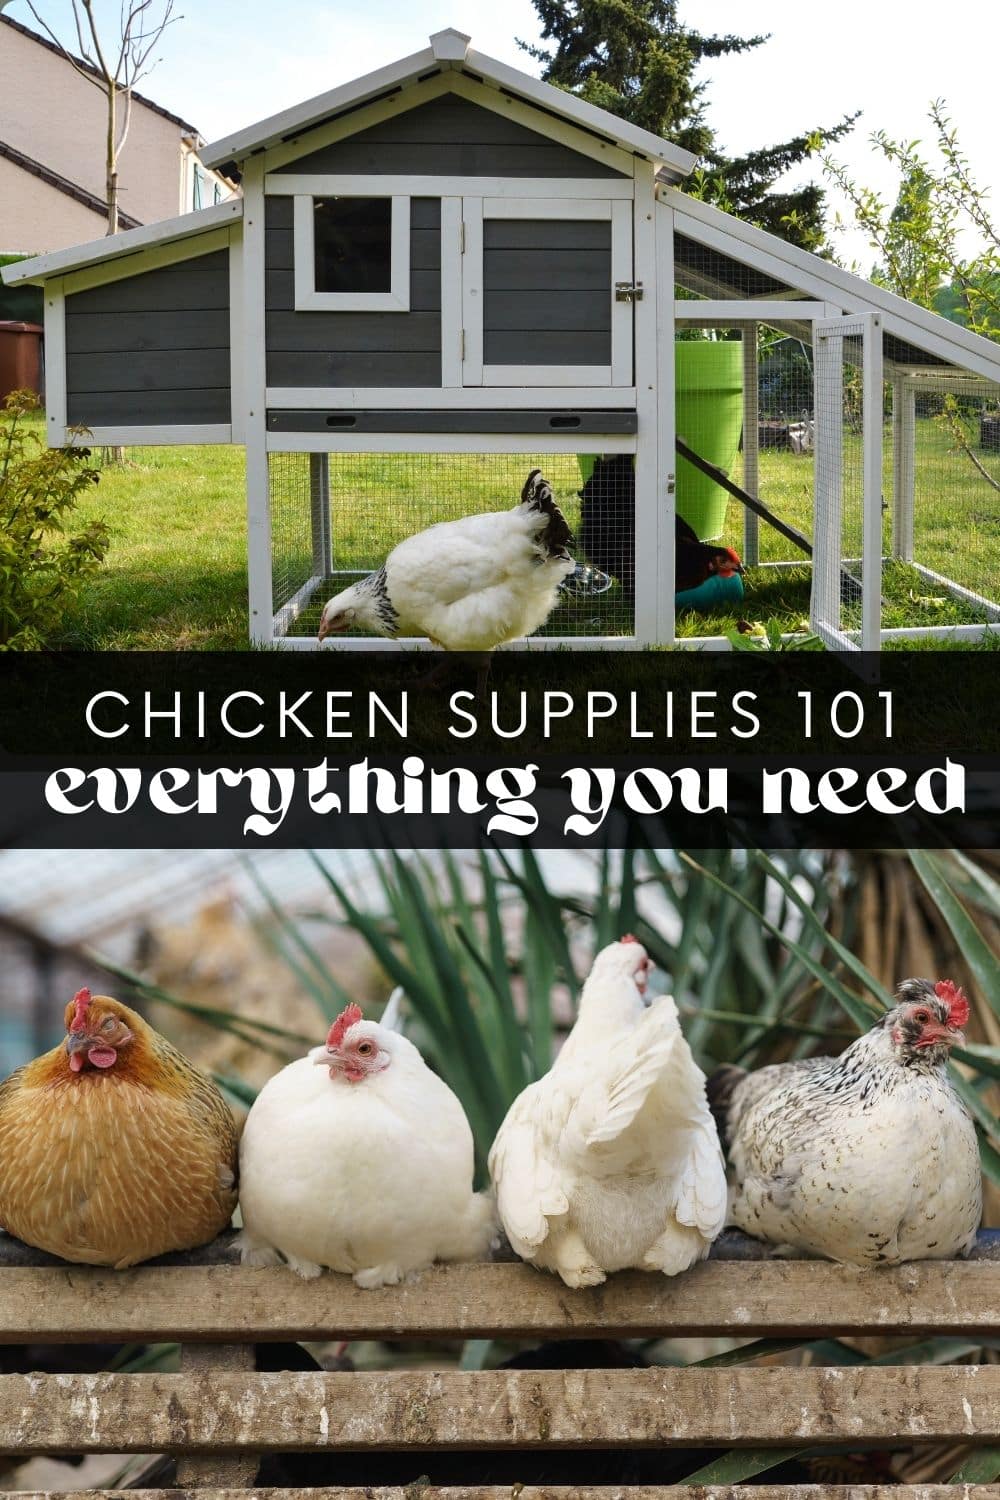 Discover all the chicken supplies you'll ever need from an experienced chicken owner! Cut the cost of raising chickens by learning what supplies are necessary to properly care for and maintain a happy flock. We'll also look at everything you need to know about Tractor Supply chickens!